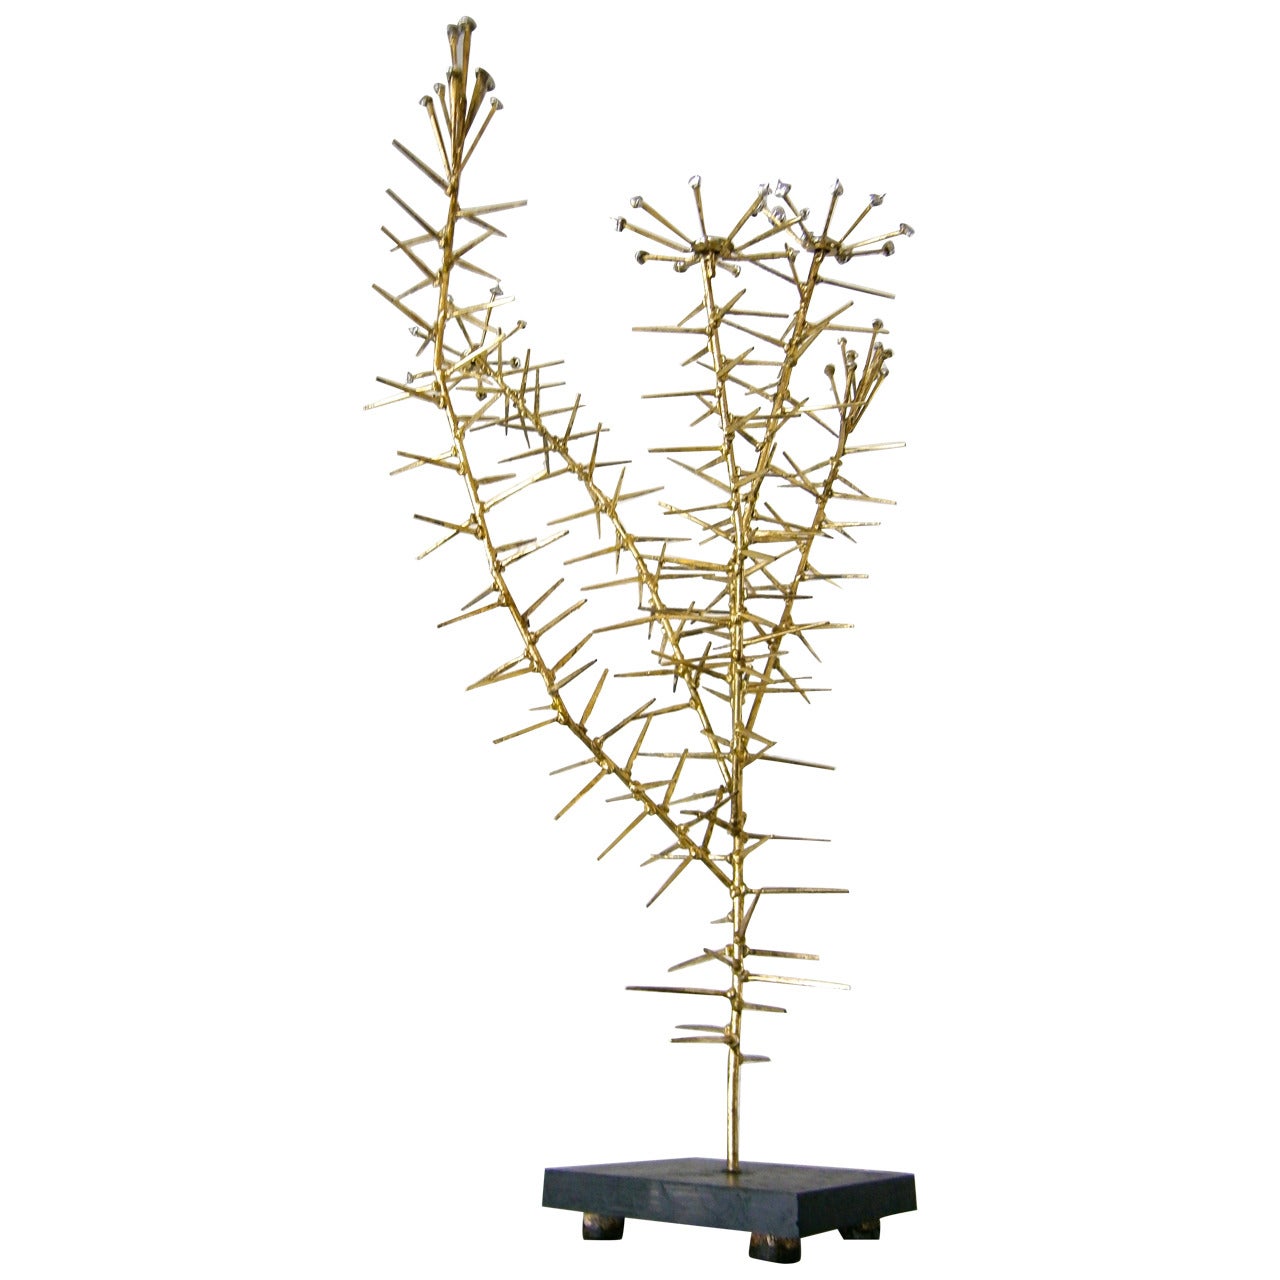 "Midas" A Thorny Hand Sculpted and Gilded Botanical Sculpture By Del Williams, For Sale